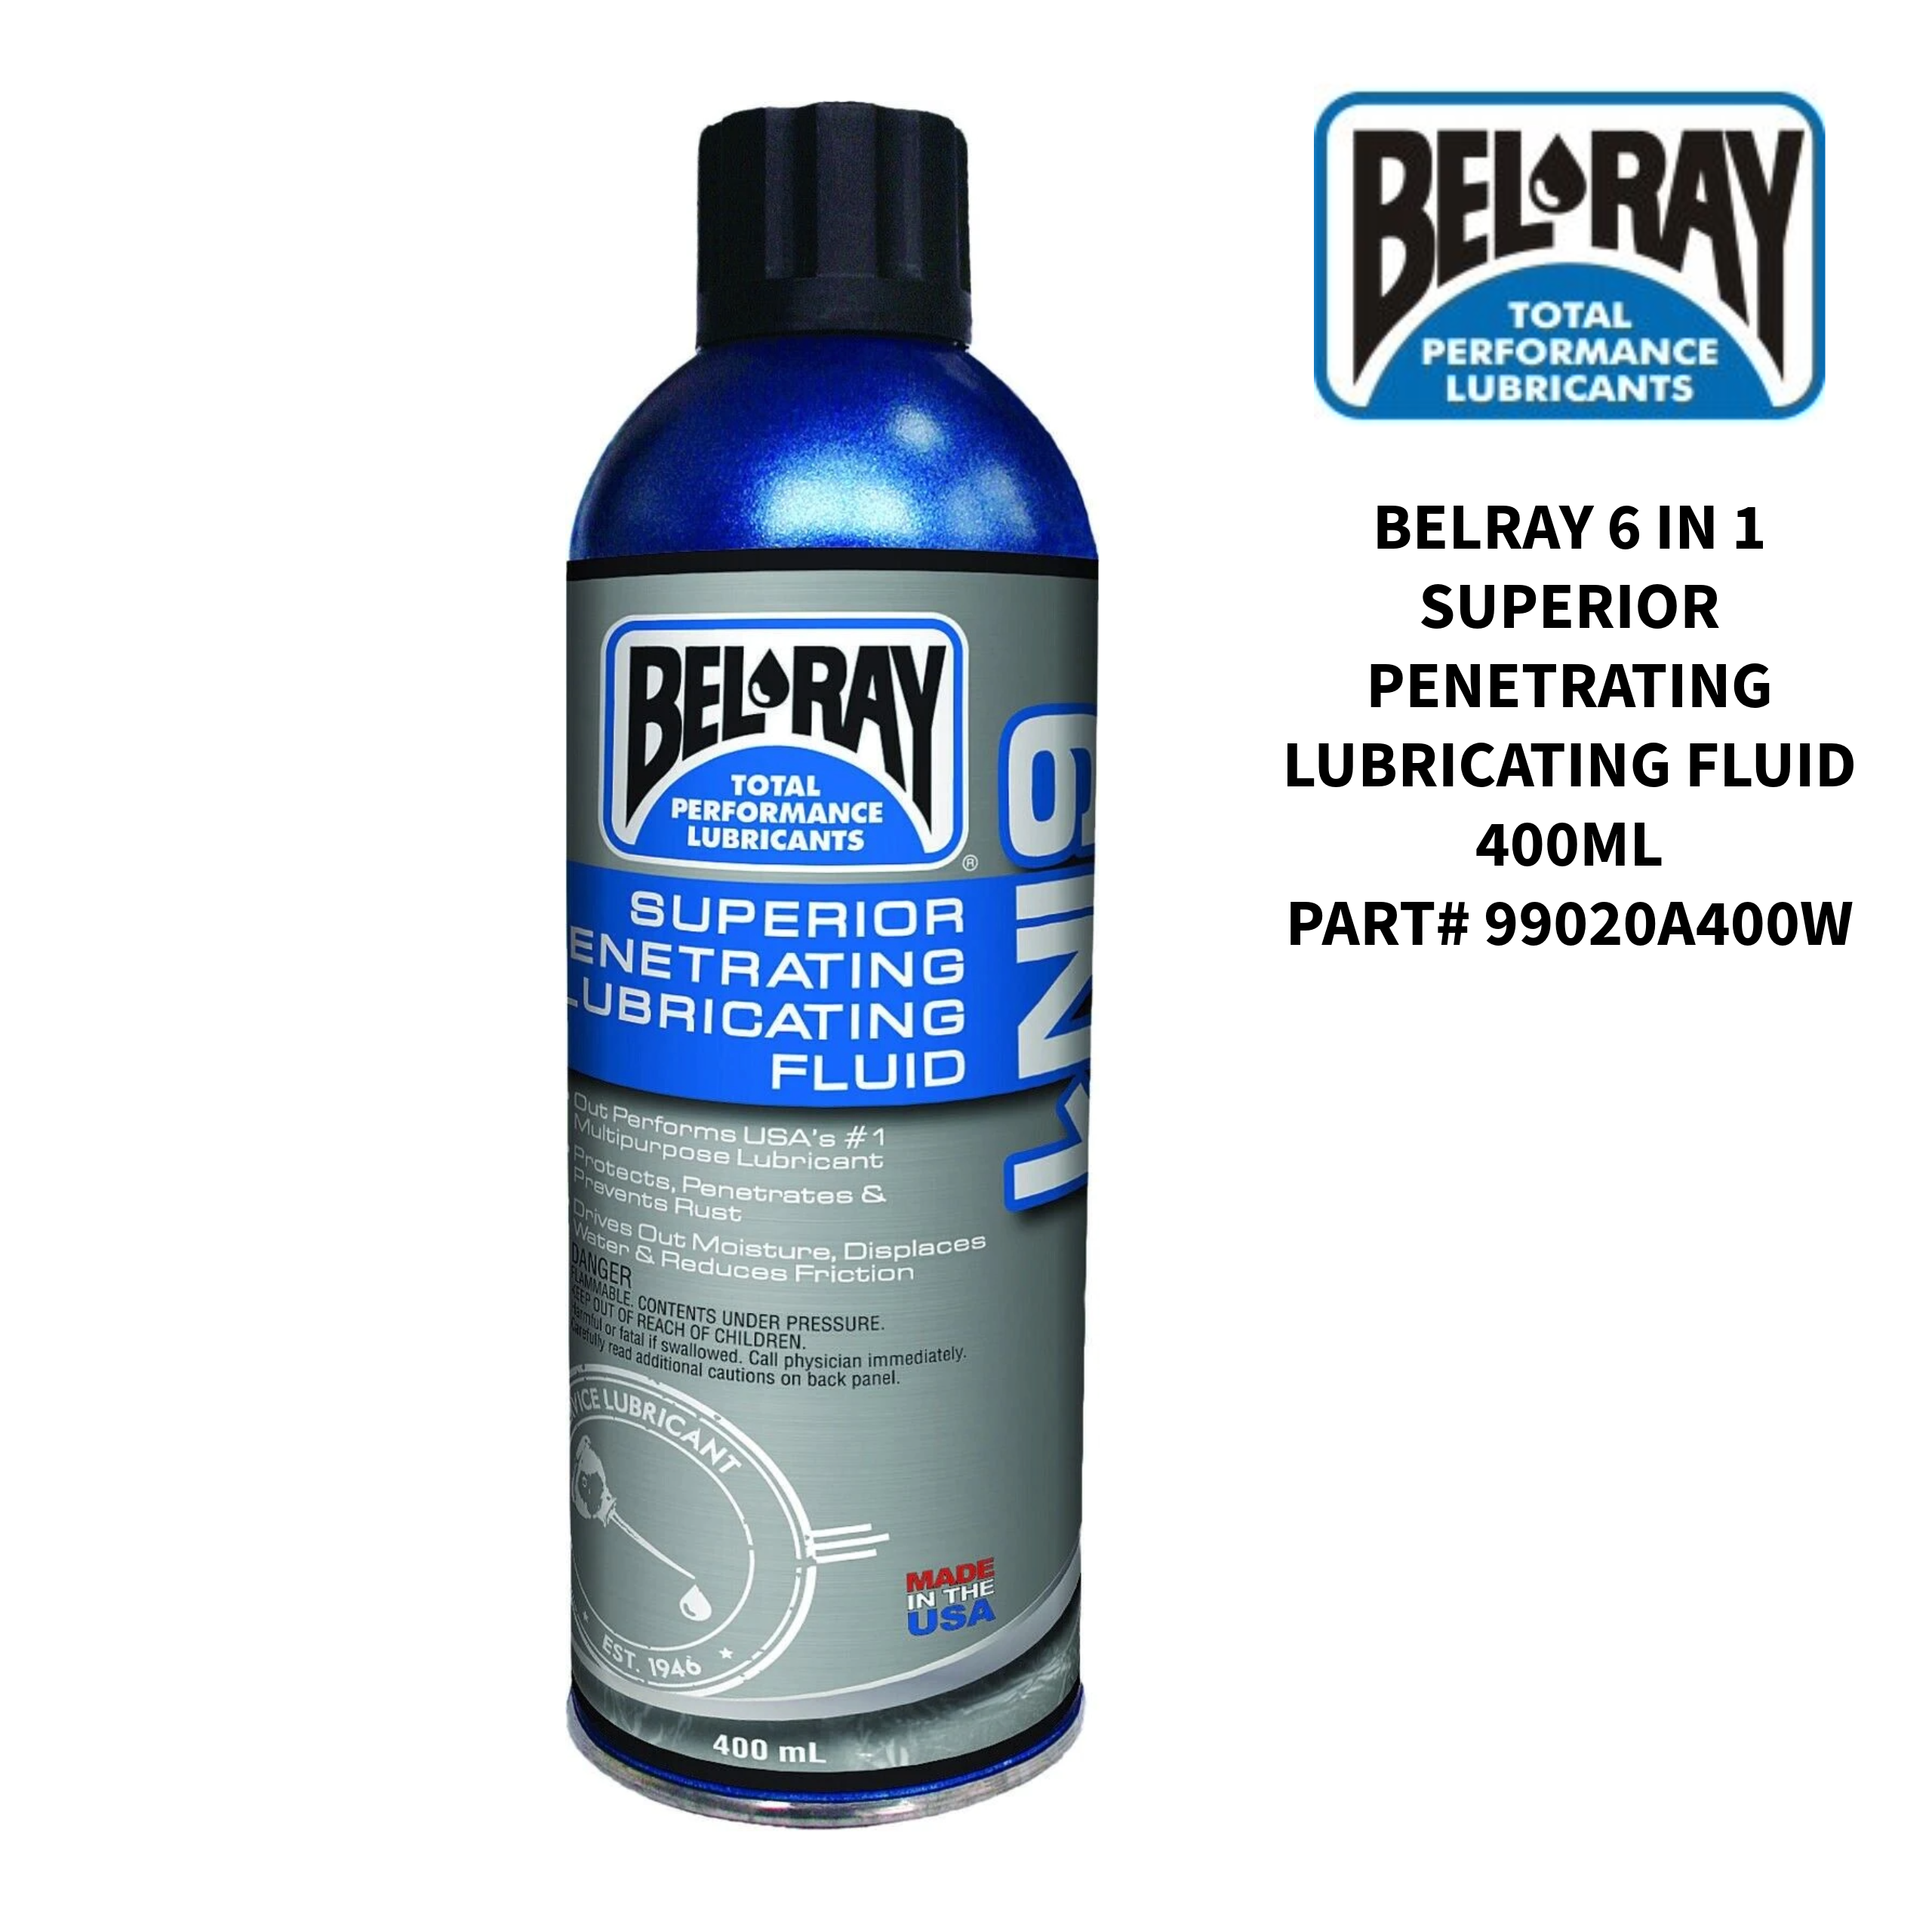 BELRAY 6 IN 1 SUPERIOR PENETRATING  LUBRICATING FLUID 400ML PART# 99020A400W